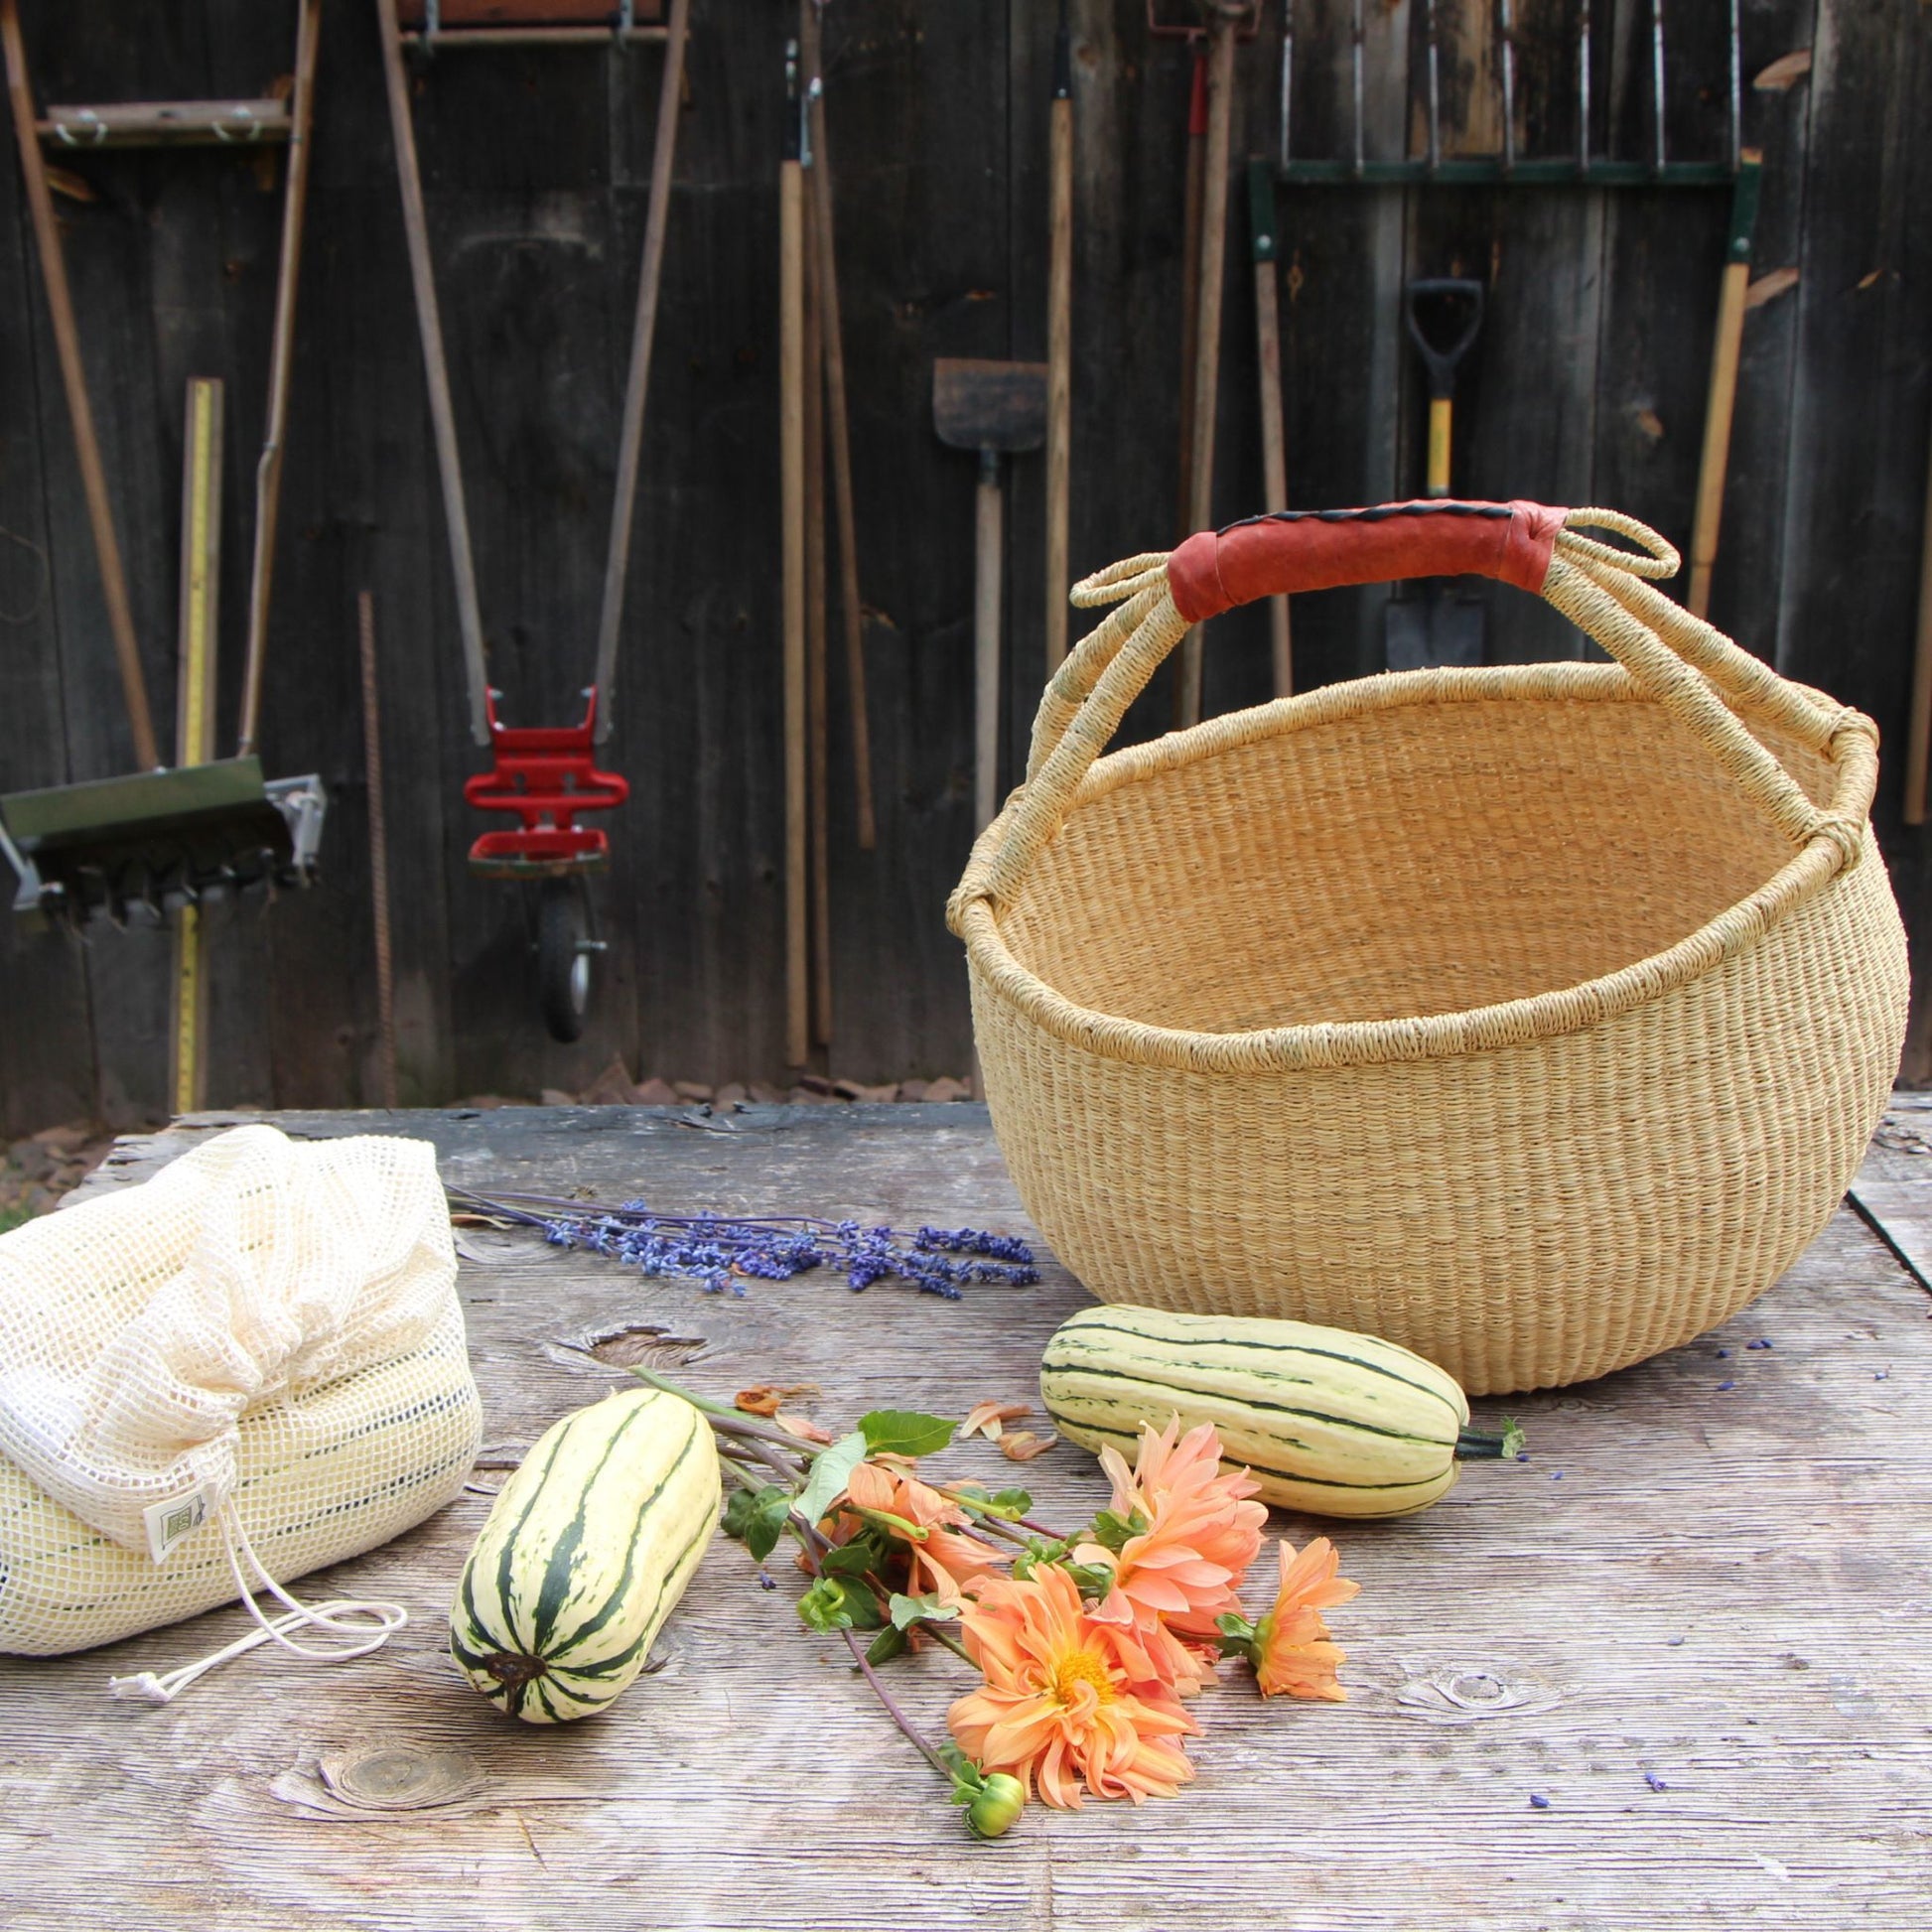 natural bolga basket with produce, squash and flowers